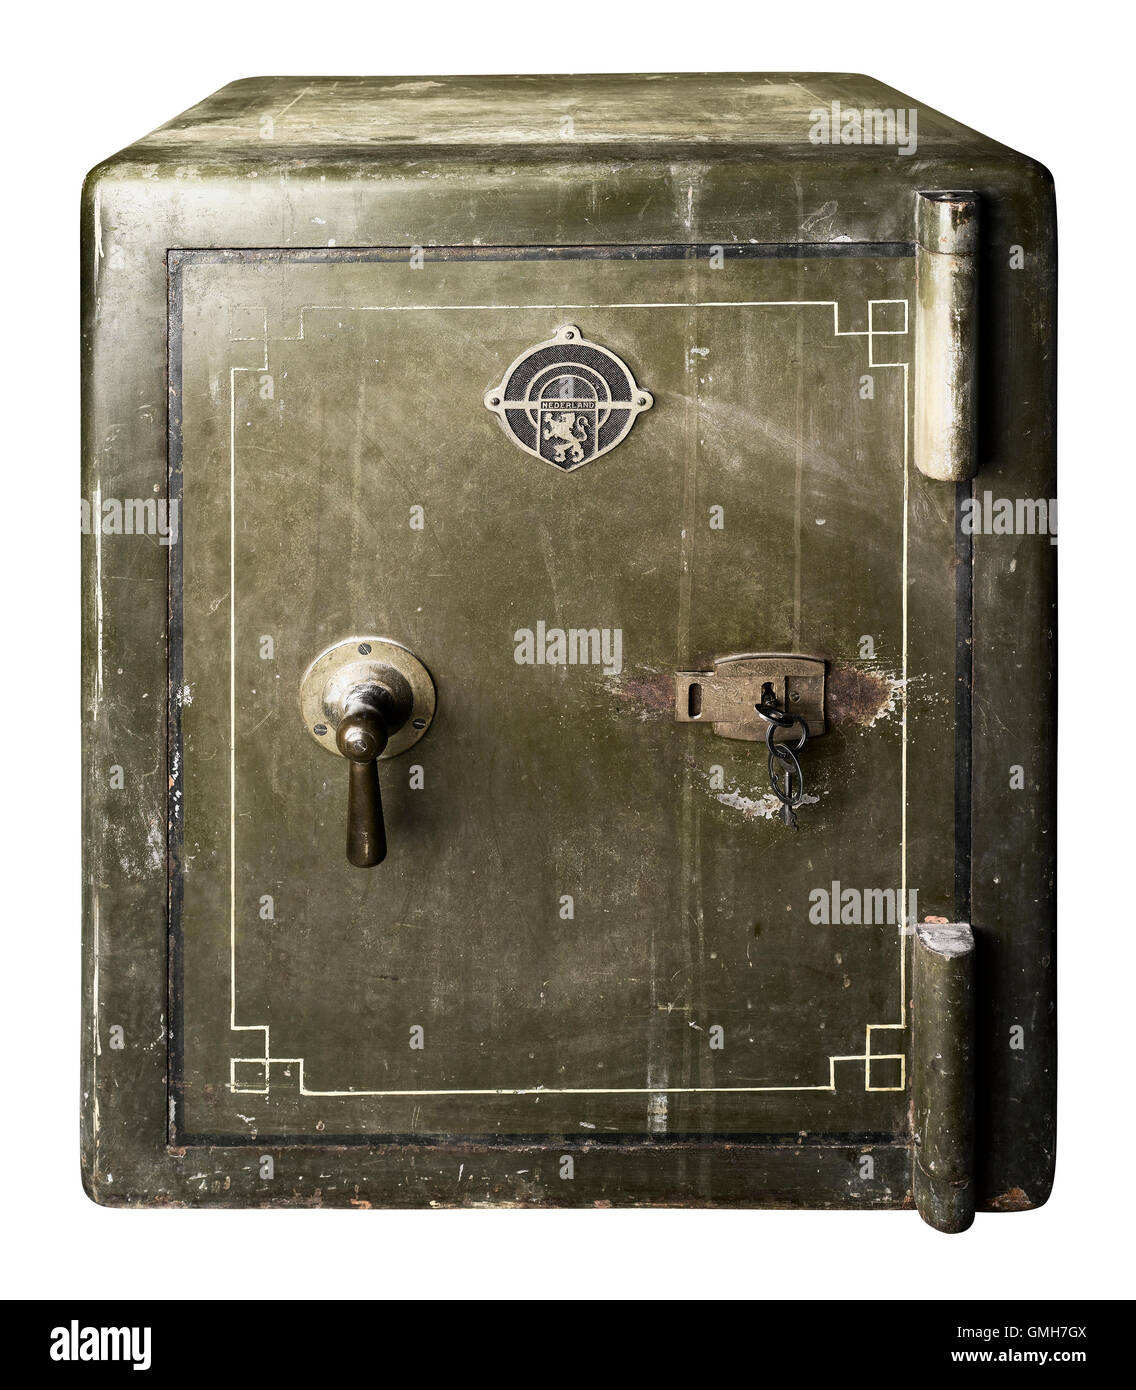 Green old safe Stock Photo